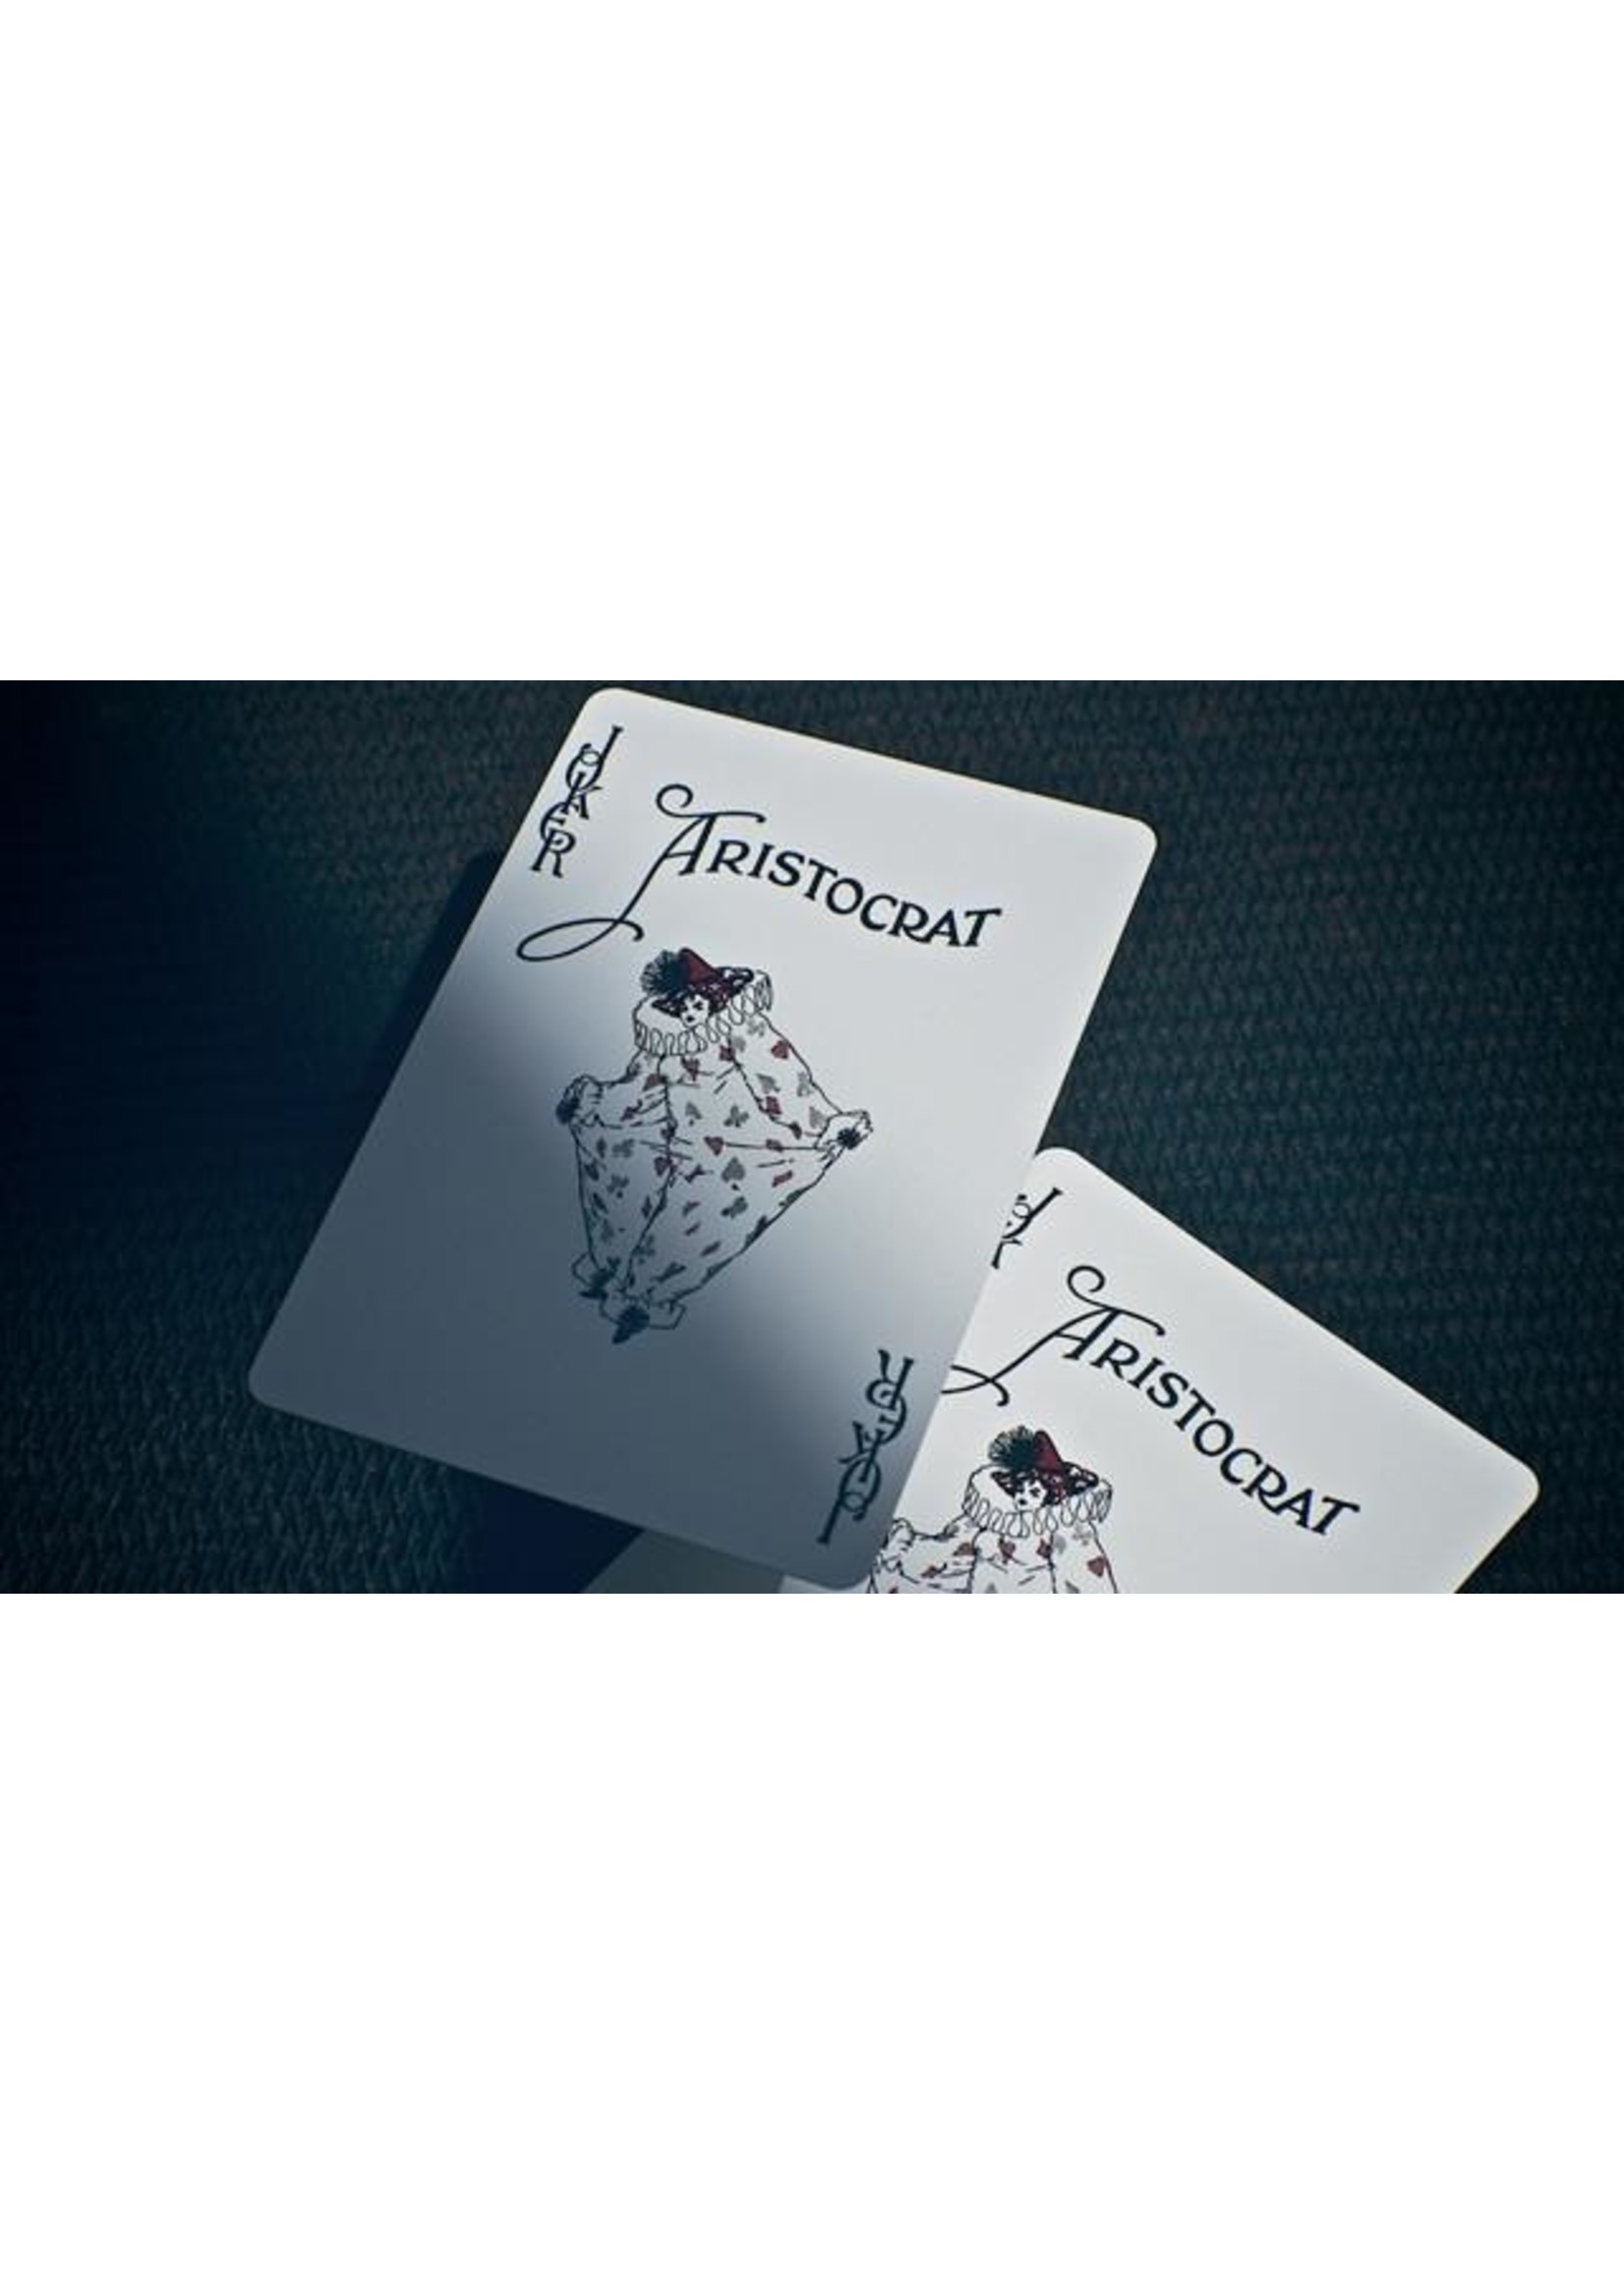 Theory11 Aristocrats Blue Playing Cards